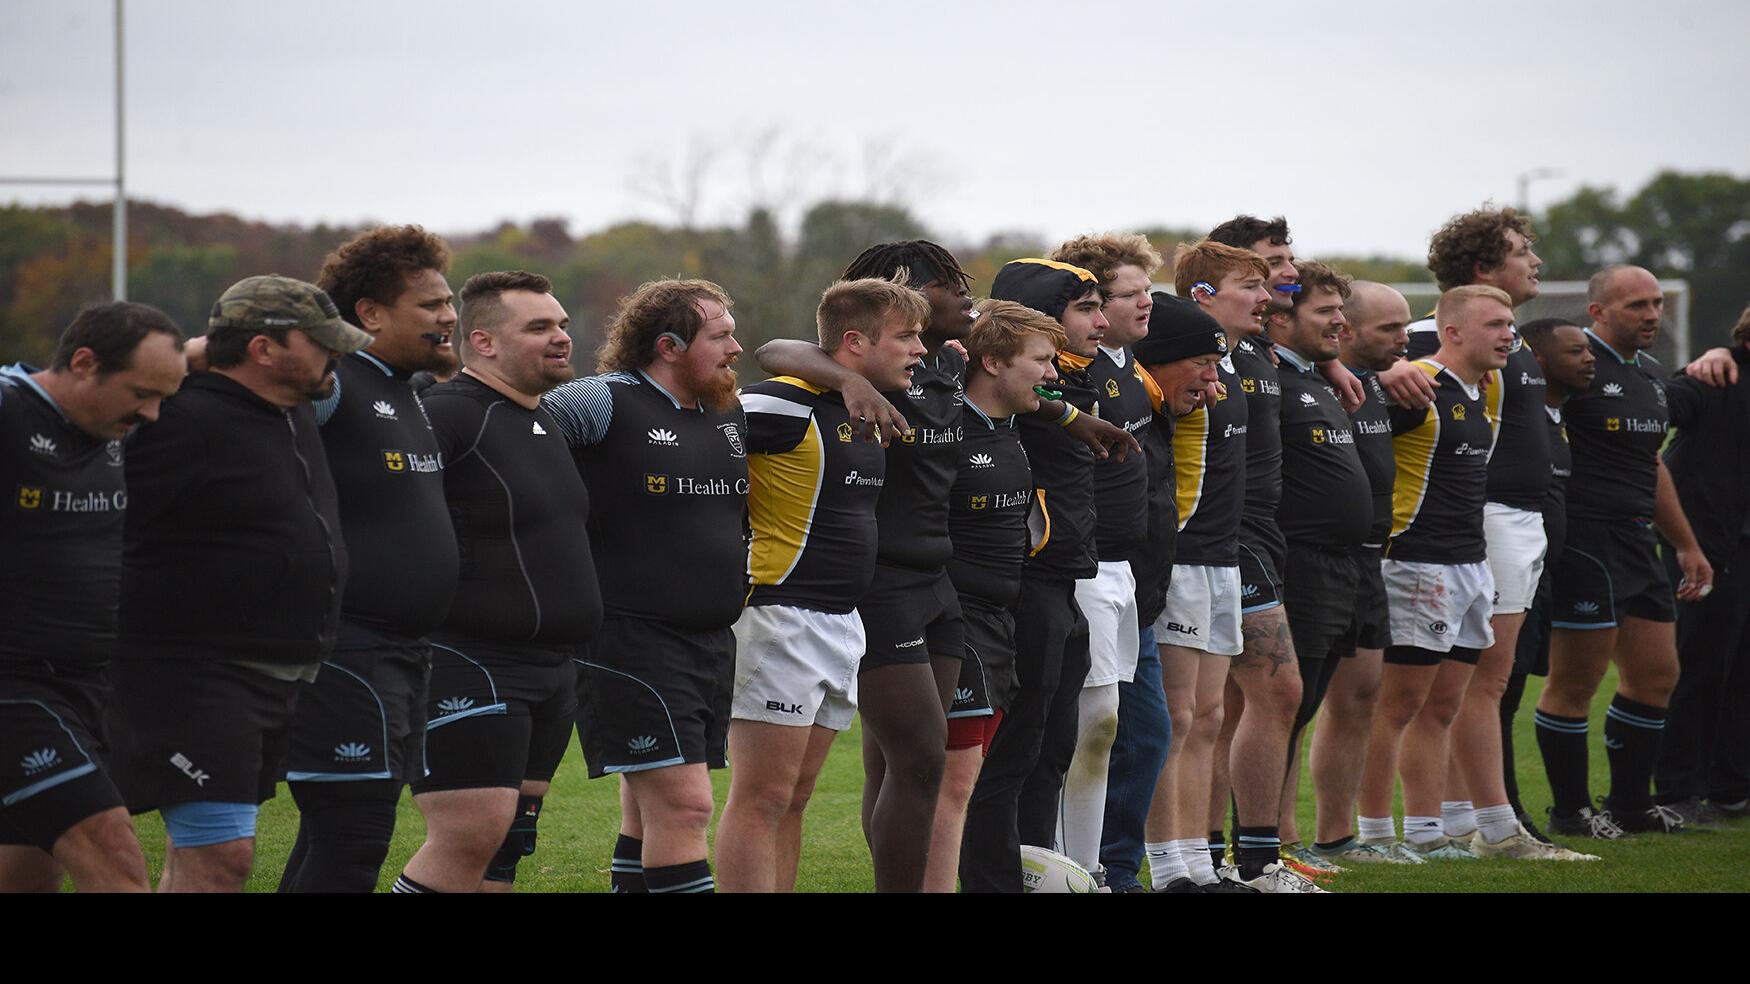 VIDEO: Columbia Outlaws kickoff their rugby season, News